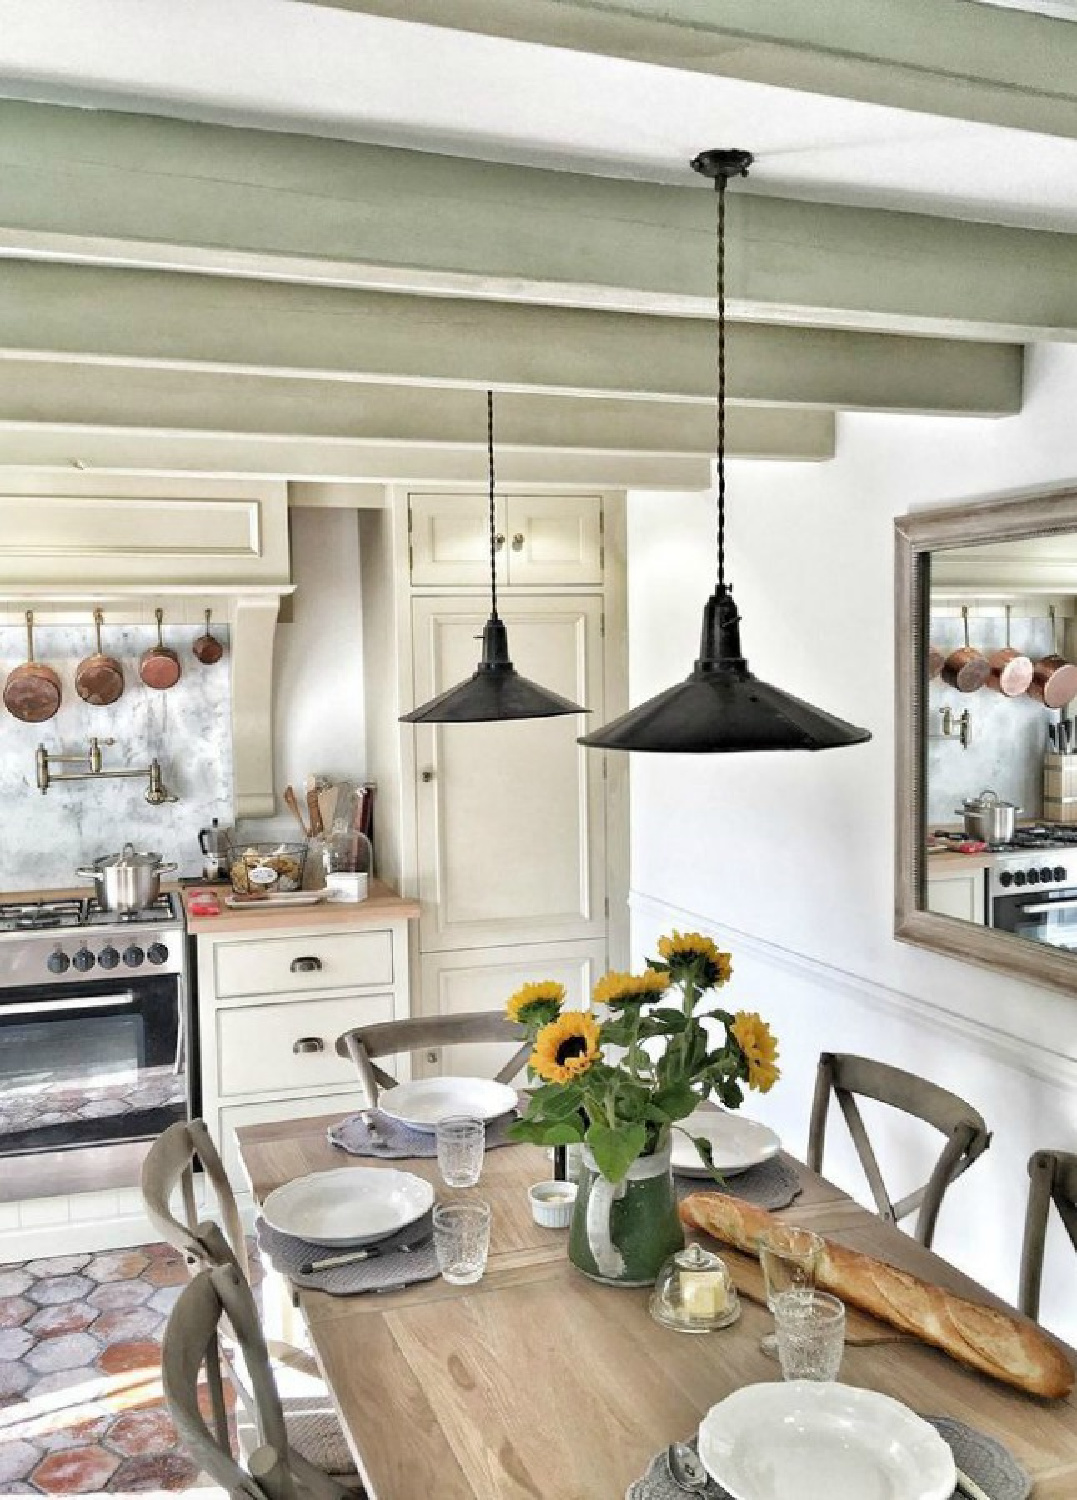 French farmhouse kitchen with rustic ceiling beams, terracotta tile floor, and limestone painted cabinetry - Vivi et Margot. #frenchkitchens #frenchfarmhouse